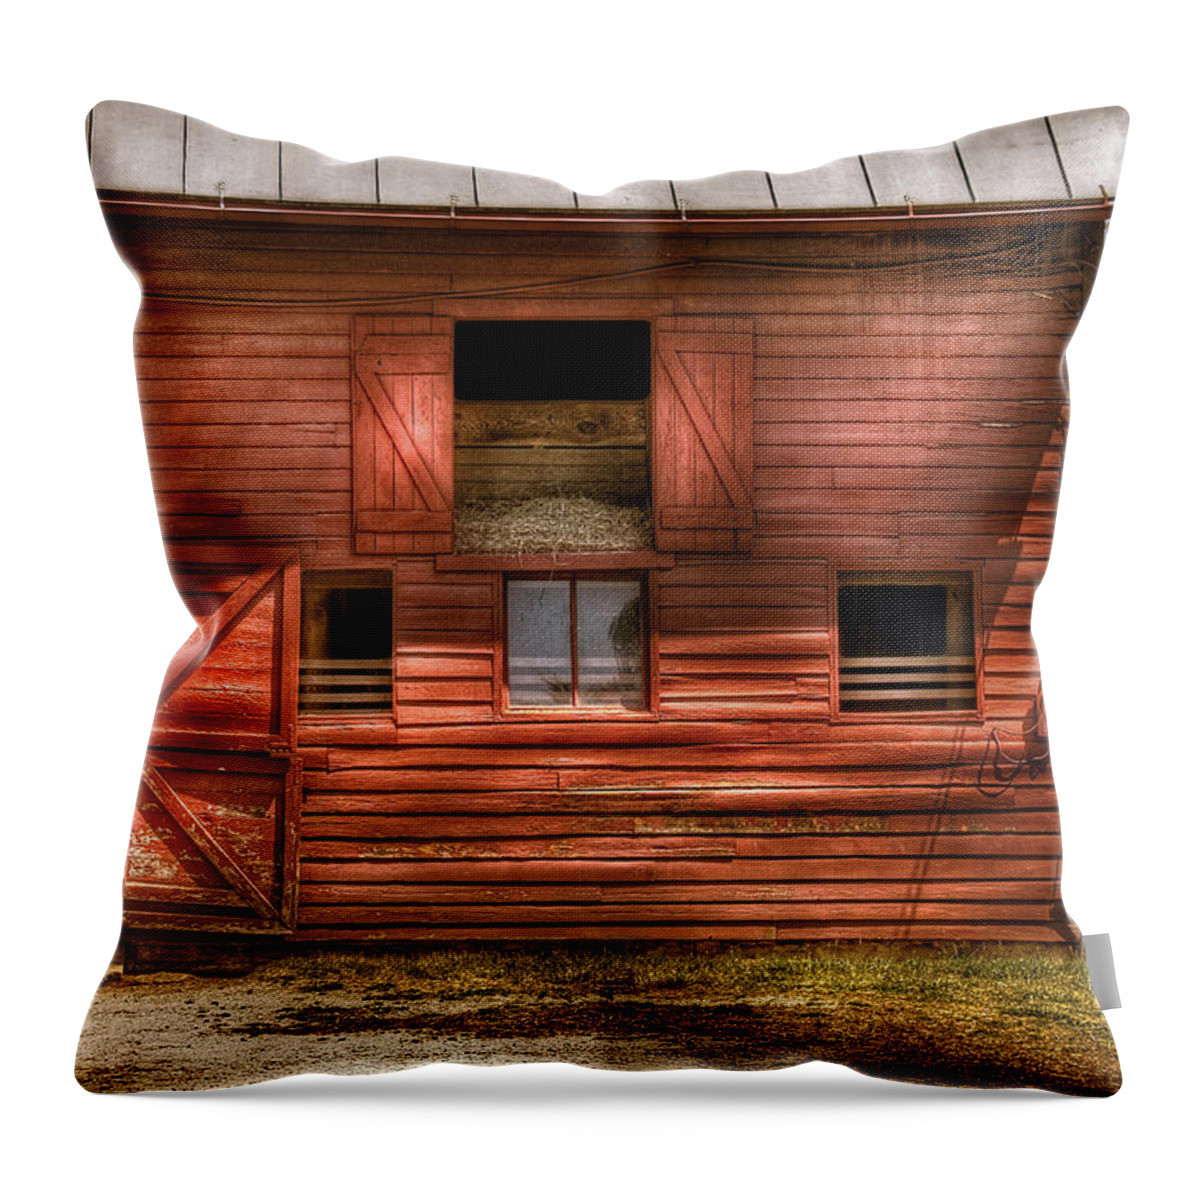 Savad Throw Pillow featuring the photograph Farm - Barn - Visiting the Farm by Mike Savad